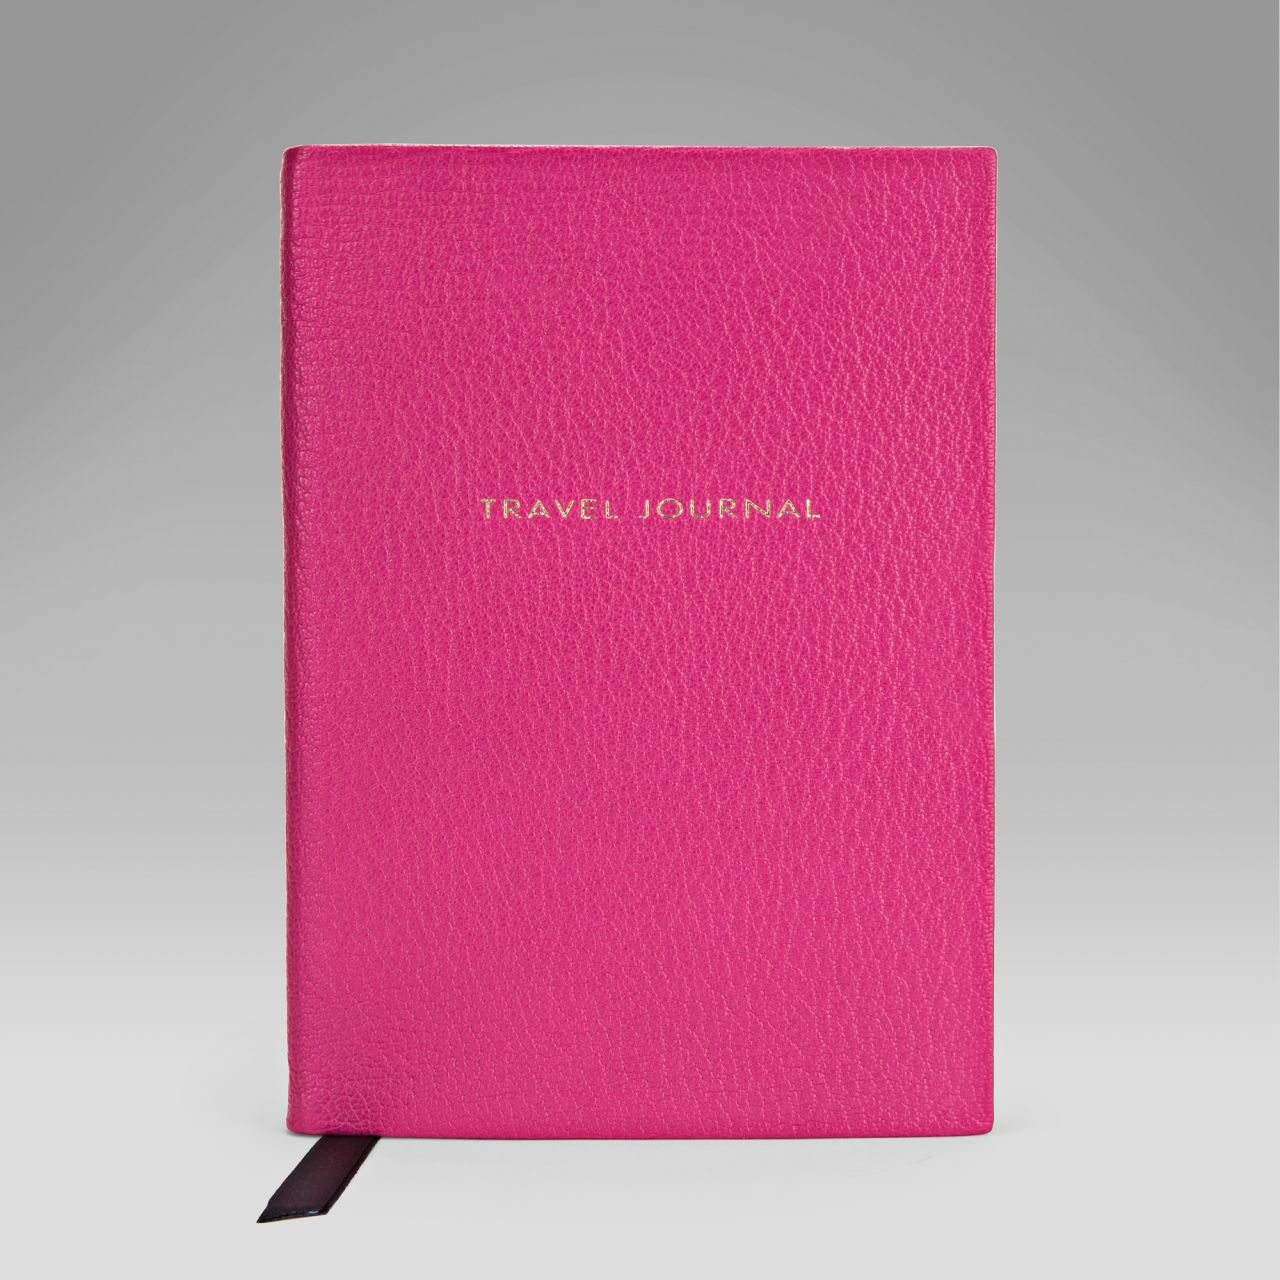 You really need to make every word count if you're jotting down your travel-related musings in the luxurious Smythson Chameleon Collection Travel Journal, which has a goatskin cover and ultra-thin pages.